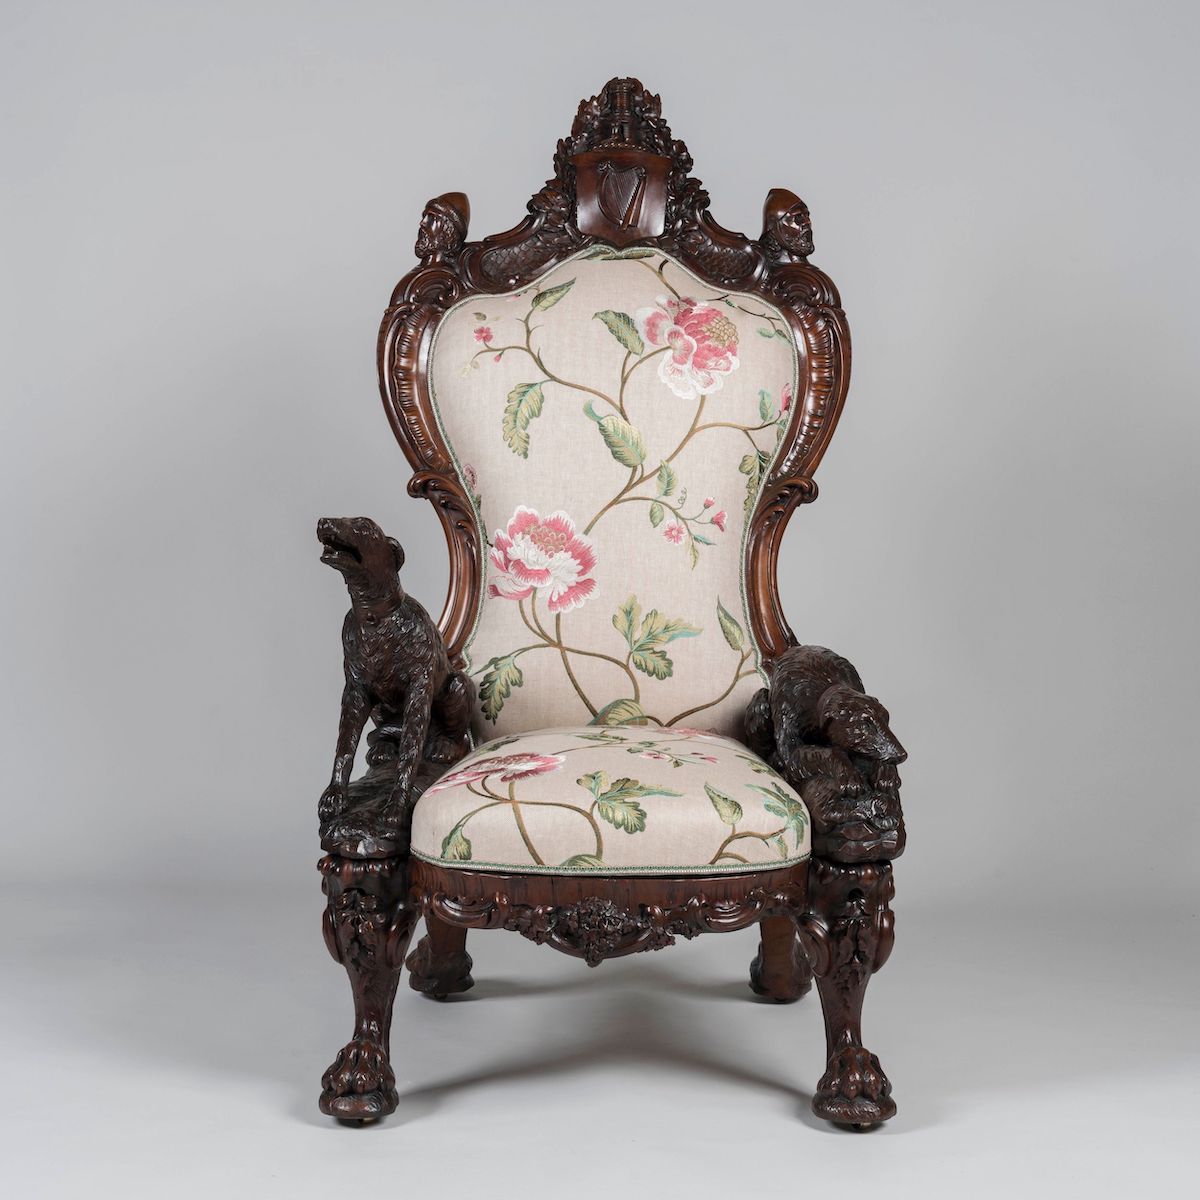 The 1851 Great Exhibition chair created by Arthur Jones, shown by Butchoff Antiques